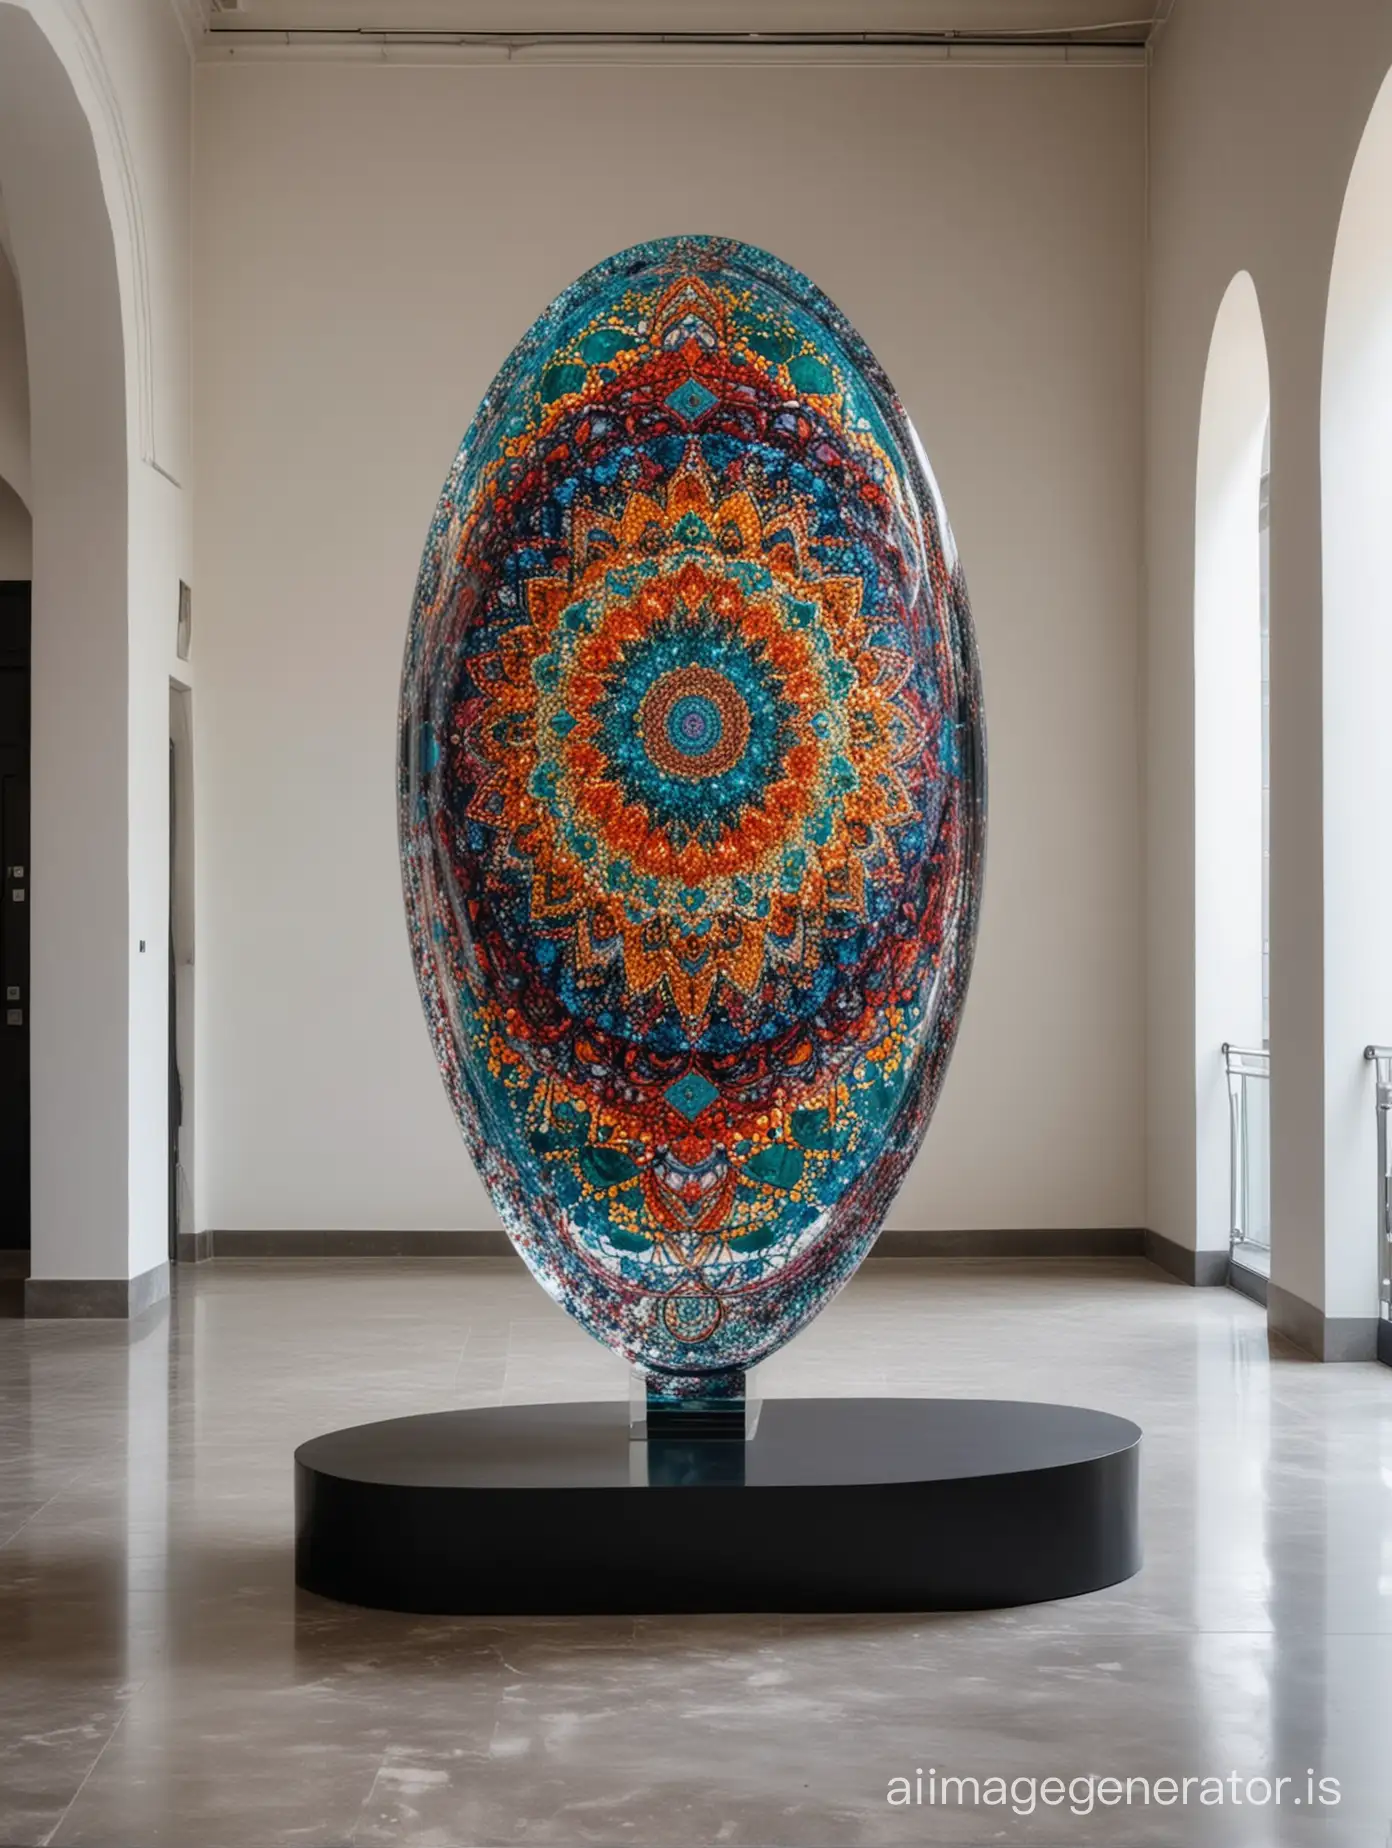 A big sculpture in the shape of colored oval and mandala made of transparent colored resin on a big black and shiny stone base in a minimal and large and empty building like art gallery in Italy with audience